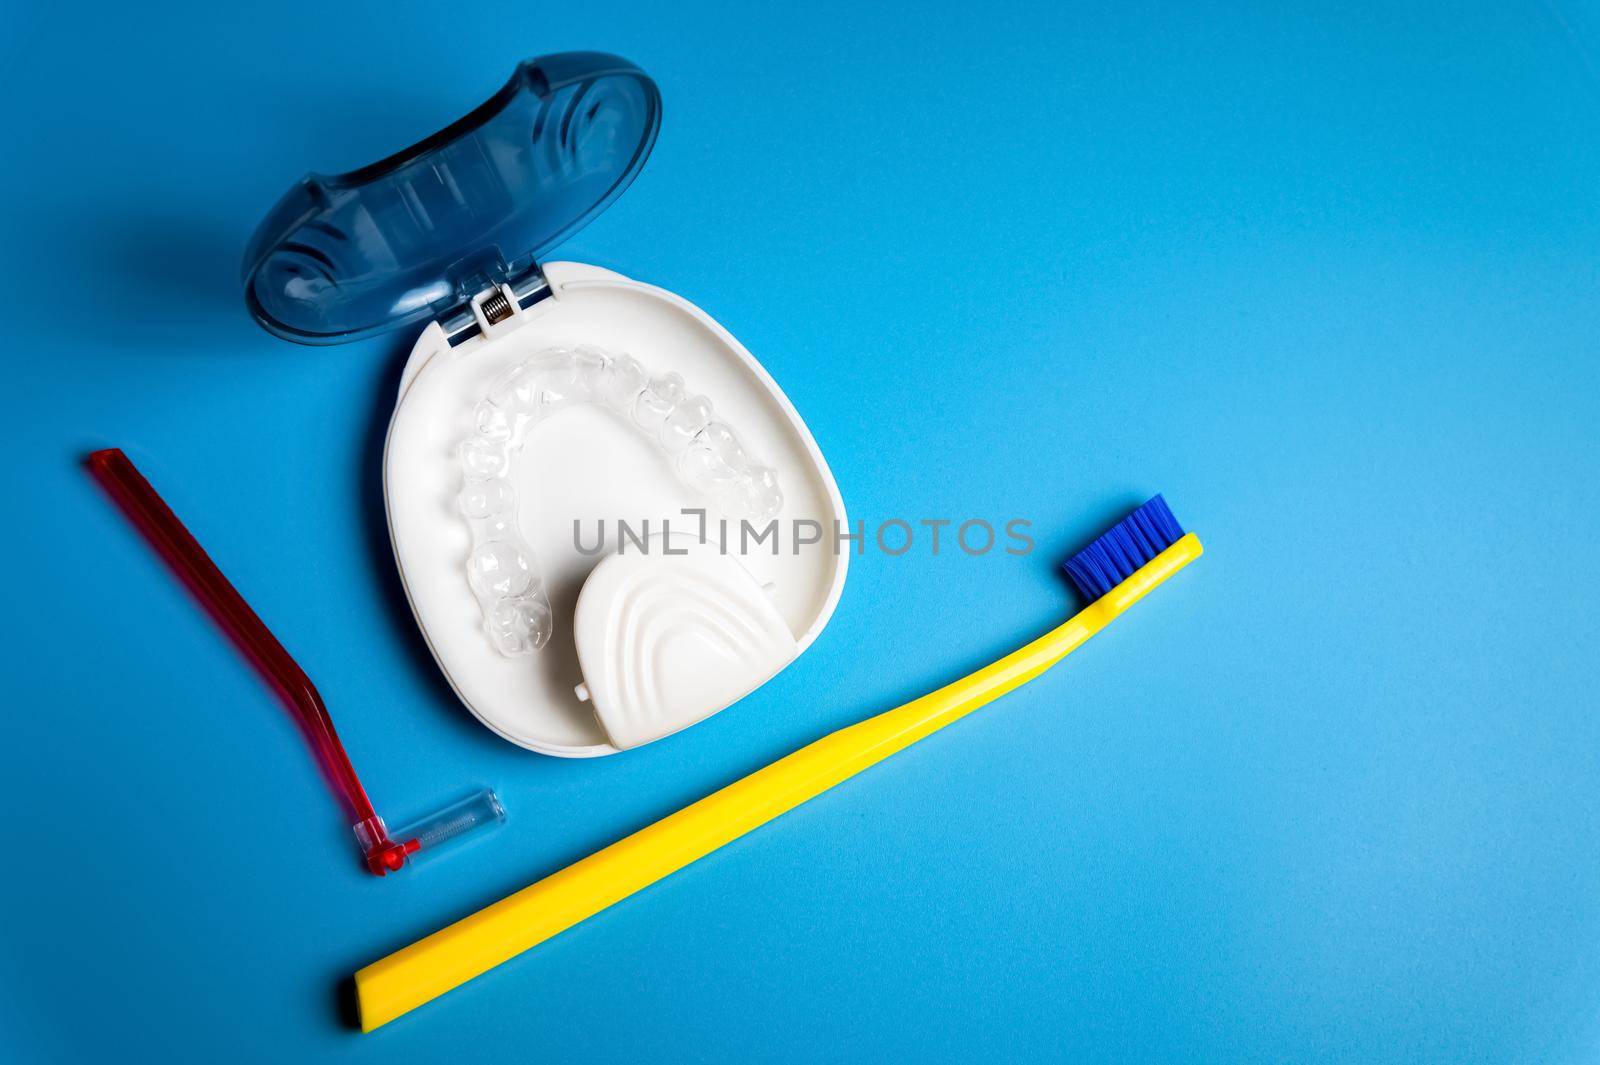 Invisible dental braces for teeth, transparent teeth aligners, plastic braces, retainers for straightening teeth, toothbrush and interdental brush on blue background, top view by yanik88